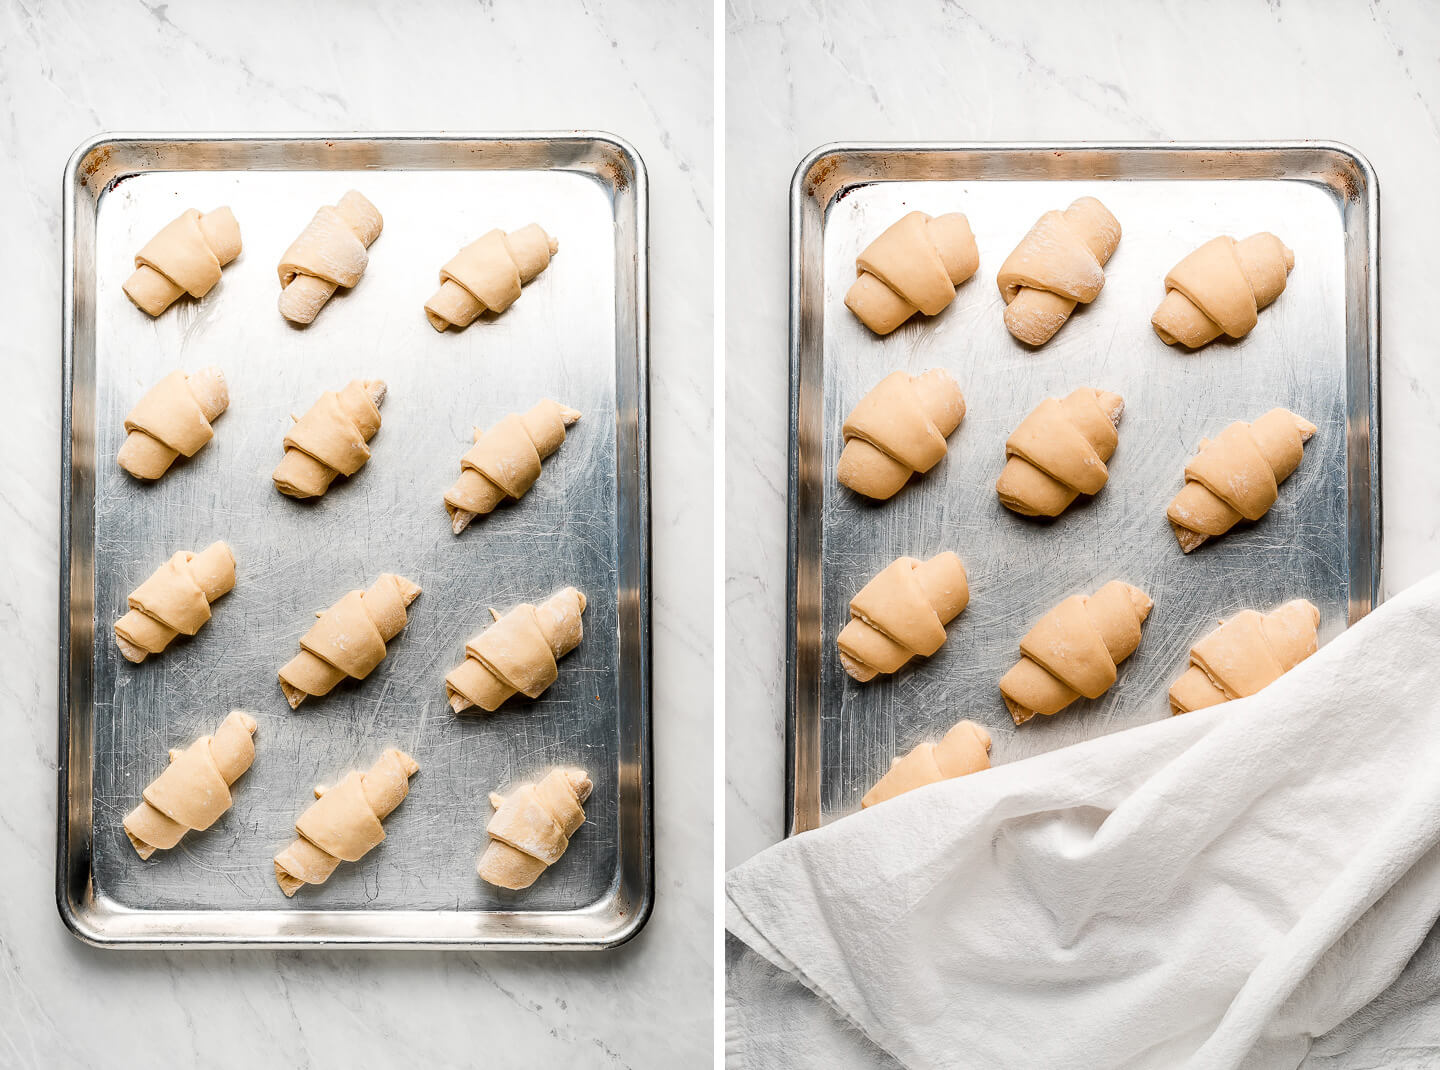 Diptych- Dough rolled into crescents on a large baking sheet; rolls risen with a towel covering half of them.